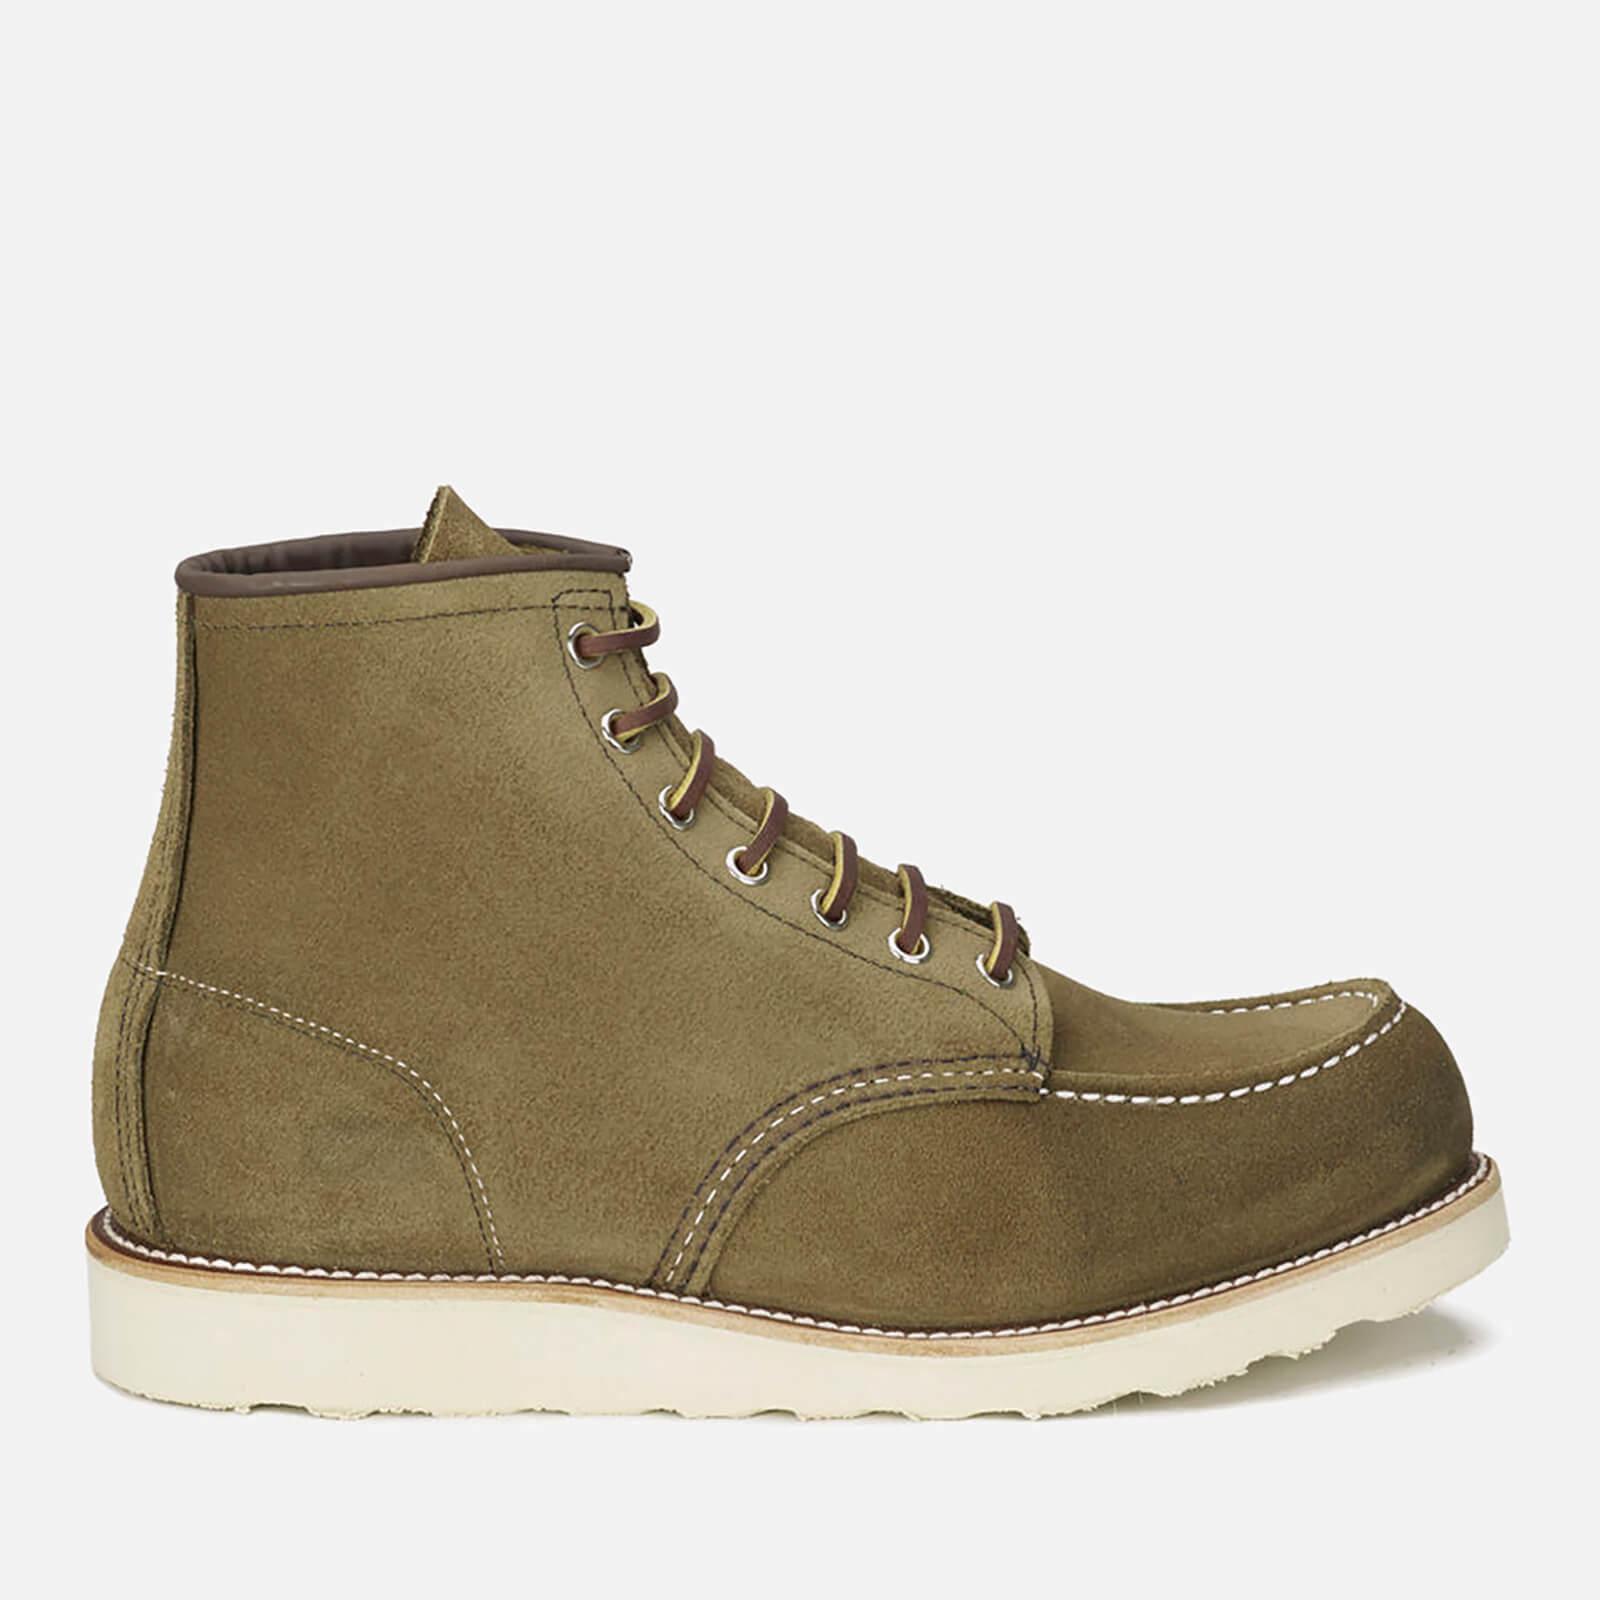 Red Wing 6 Inch Moc Toe Leather Lace Up Boots in Green for Men - Lyst